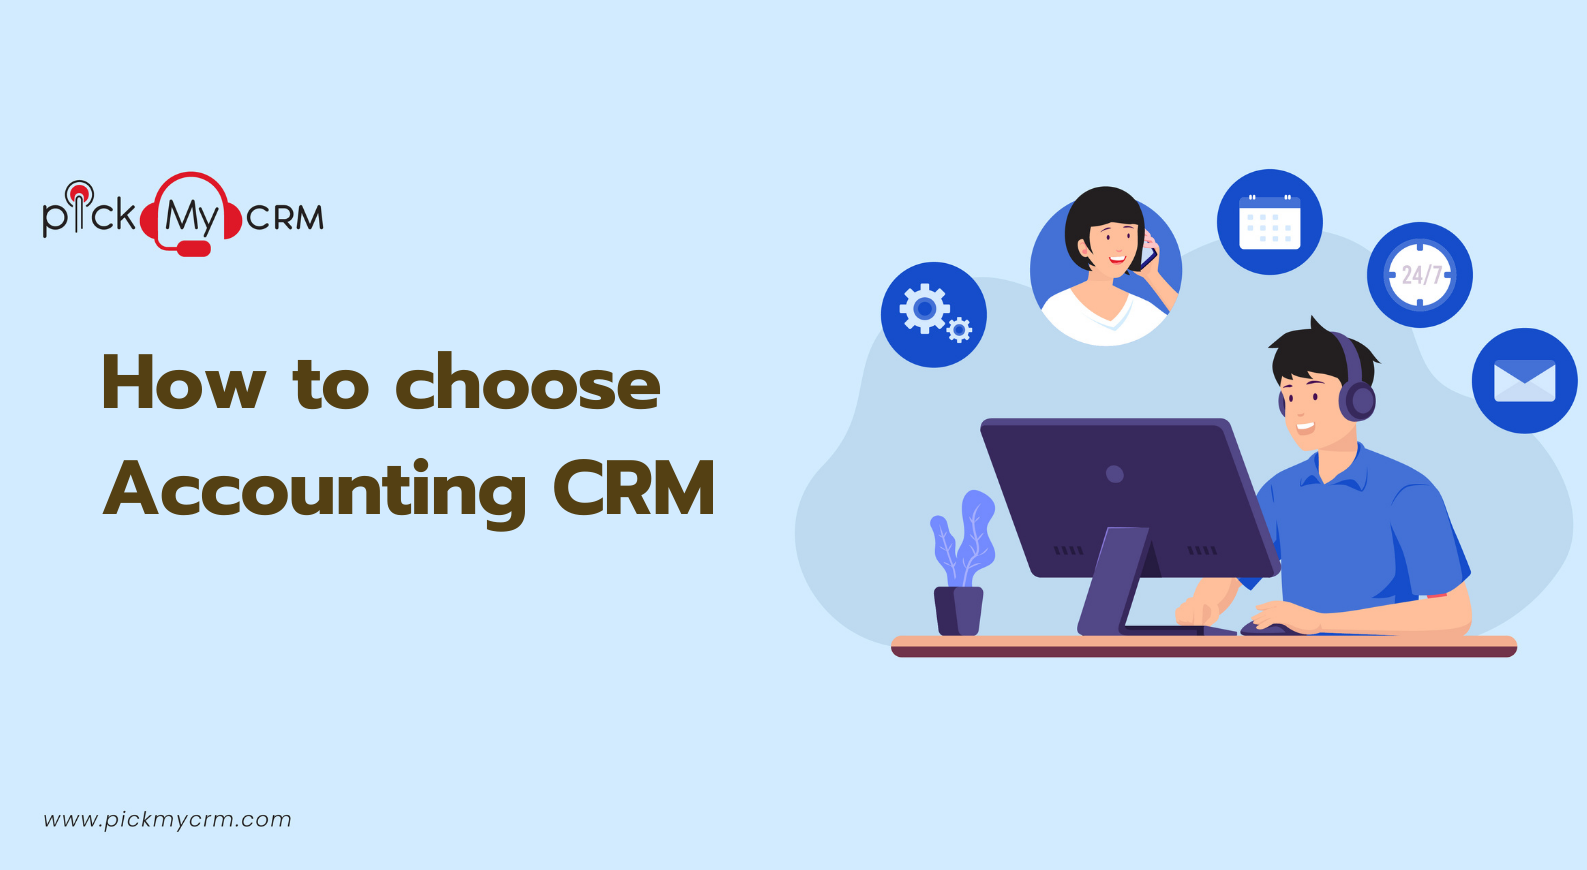 How to choose Accounting CRM